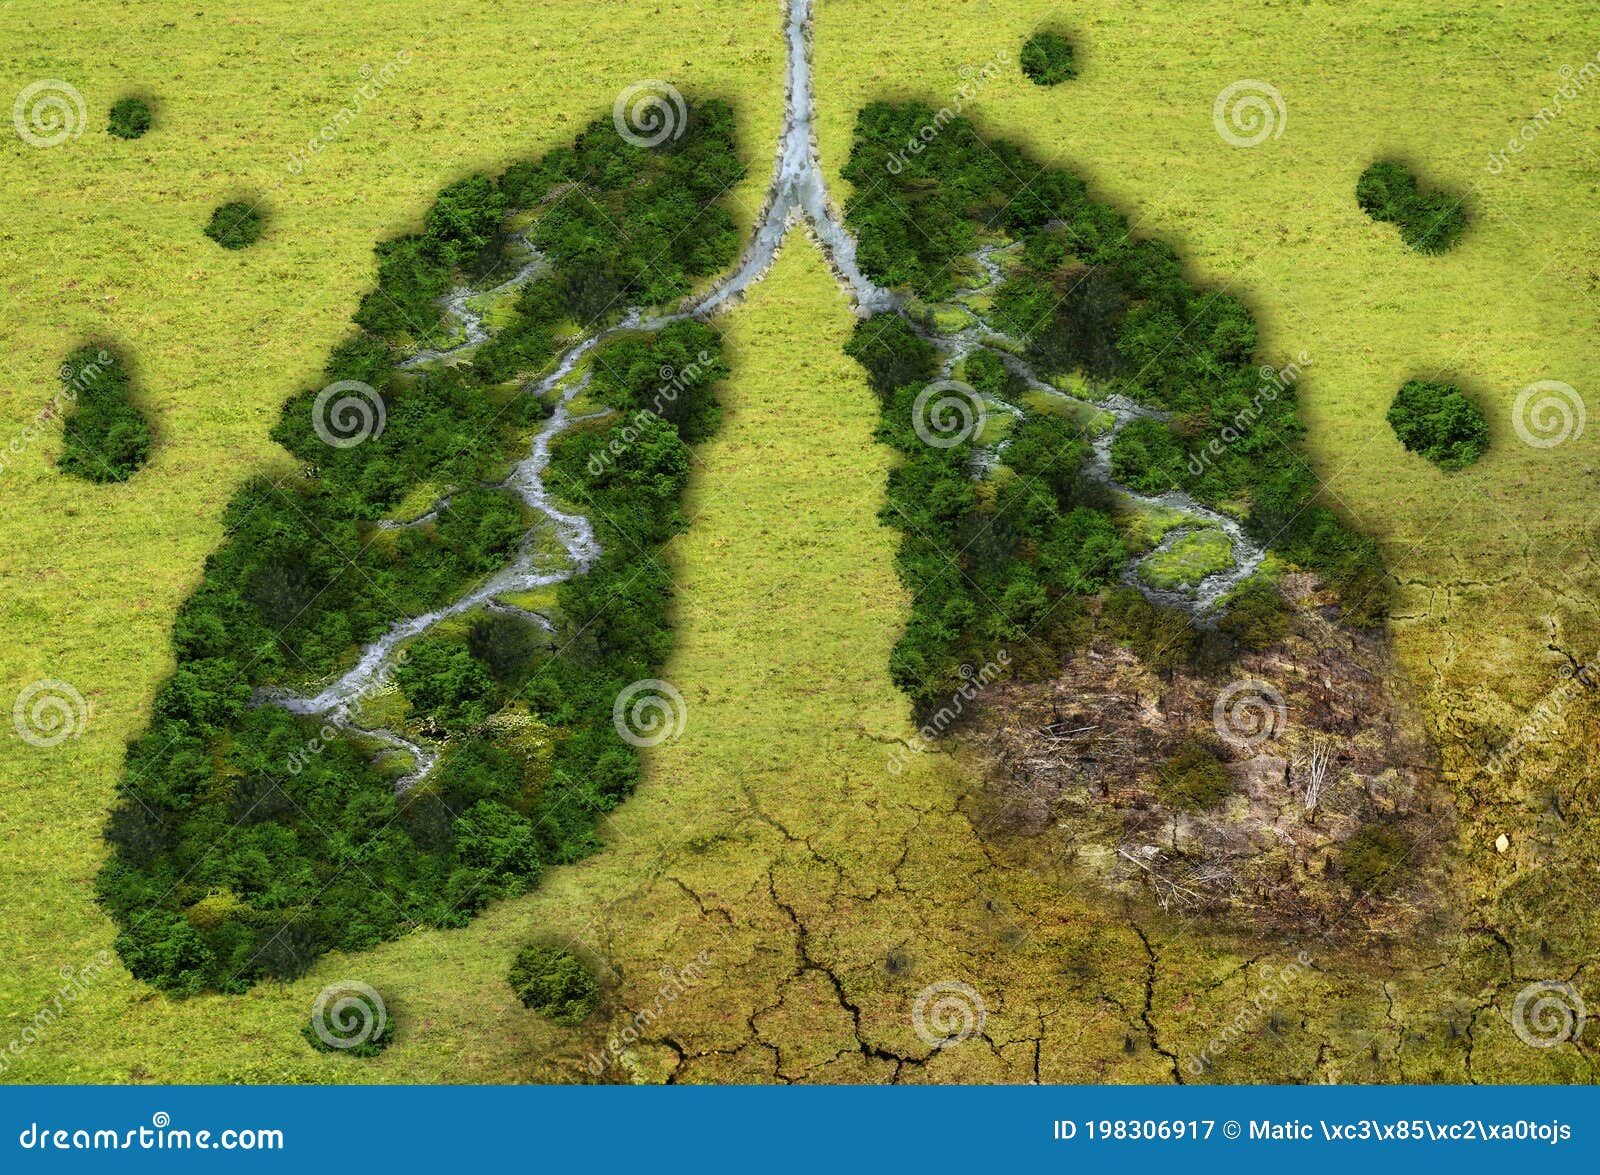 forest in a  of lungs - deforestation concept